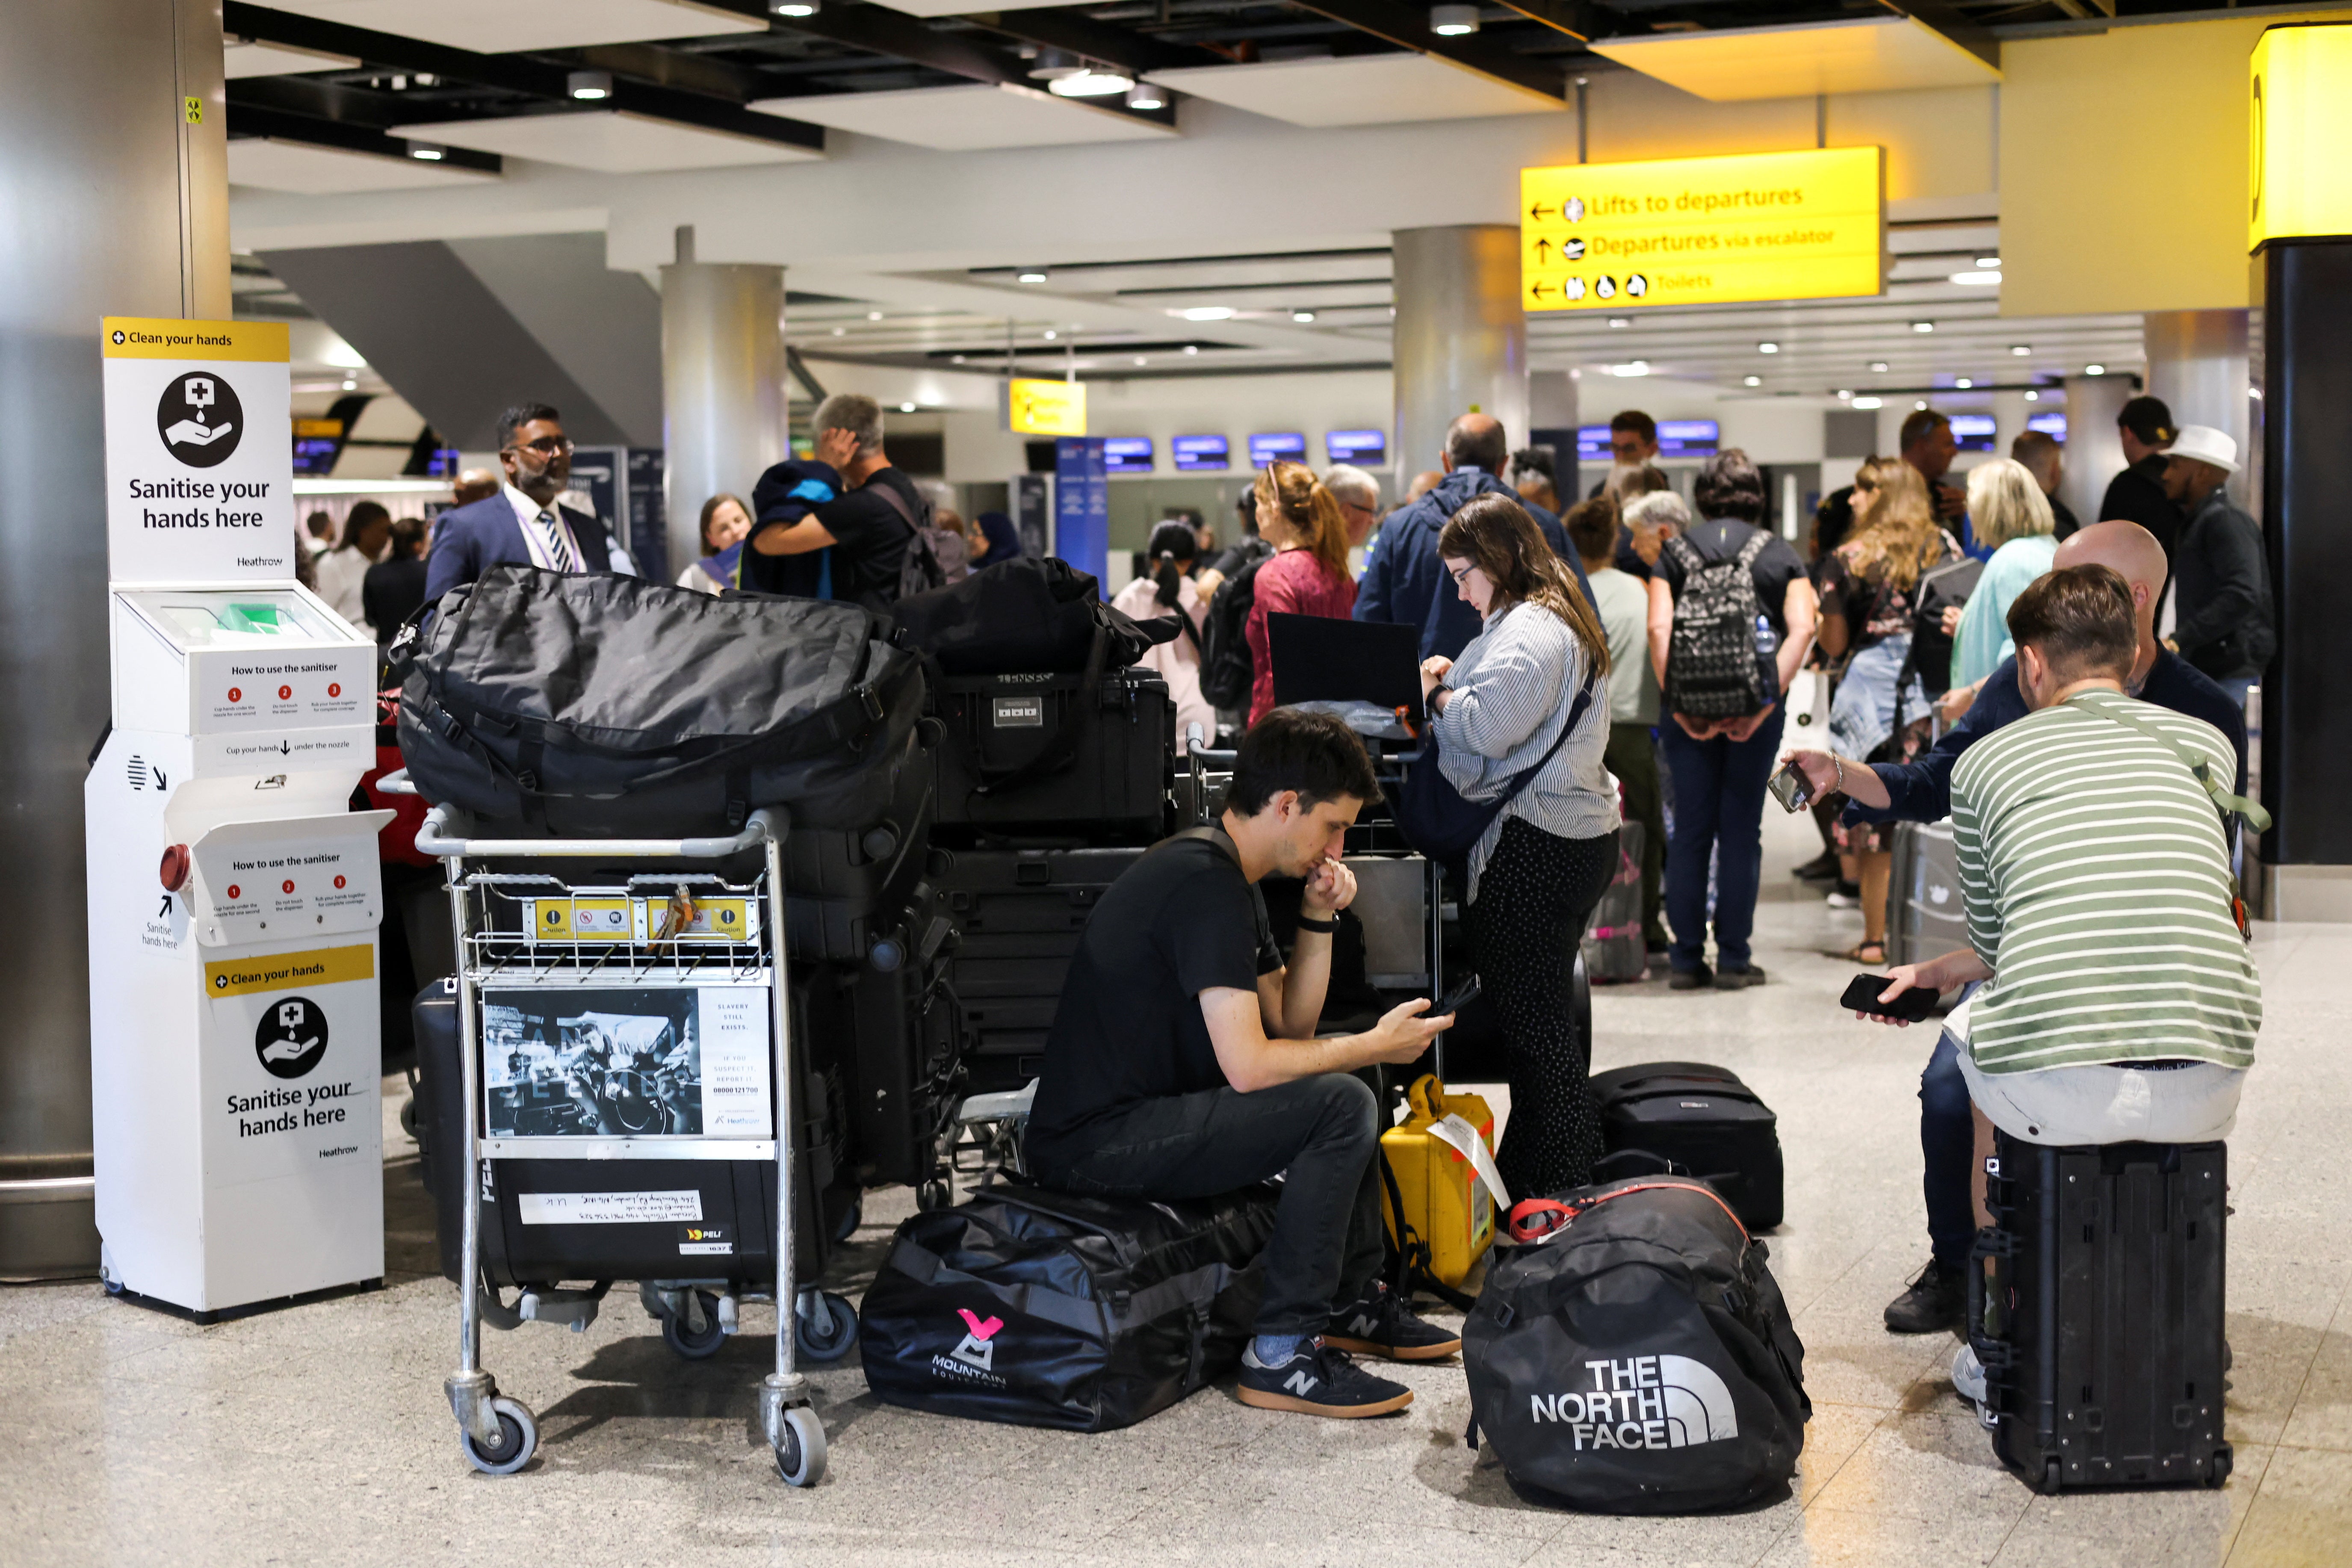 Passengers described ‘chaotic’ scenes at airports on Monday as the UK’s air traffic control systems went down